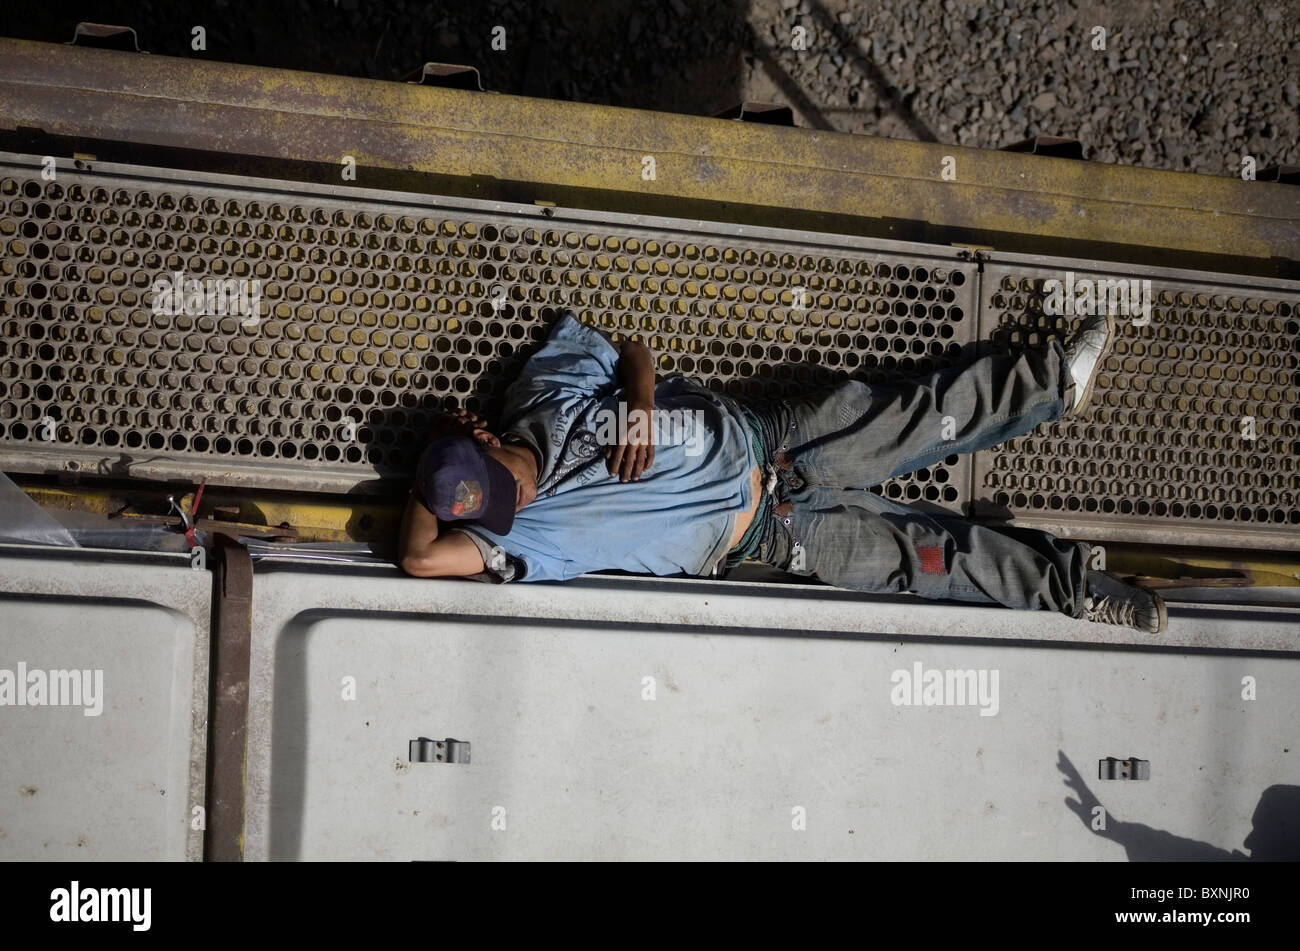 A Central American migrant traveling across Mexico to work in the United States lies on the roof of a cargo train in Mexico City Stock Photo